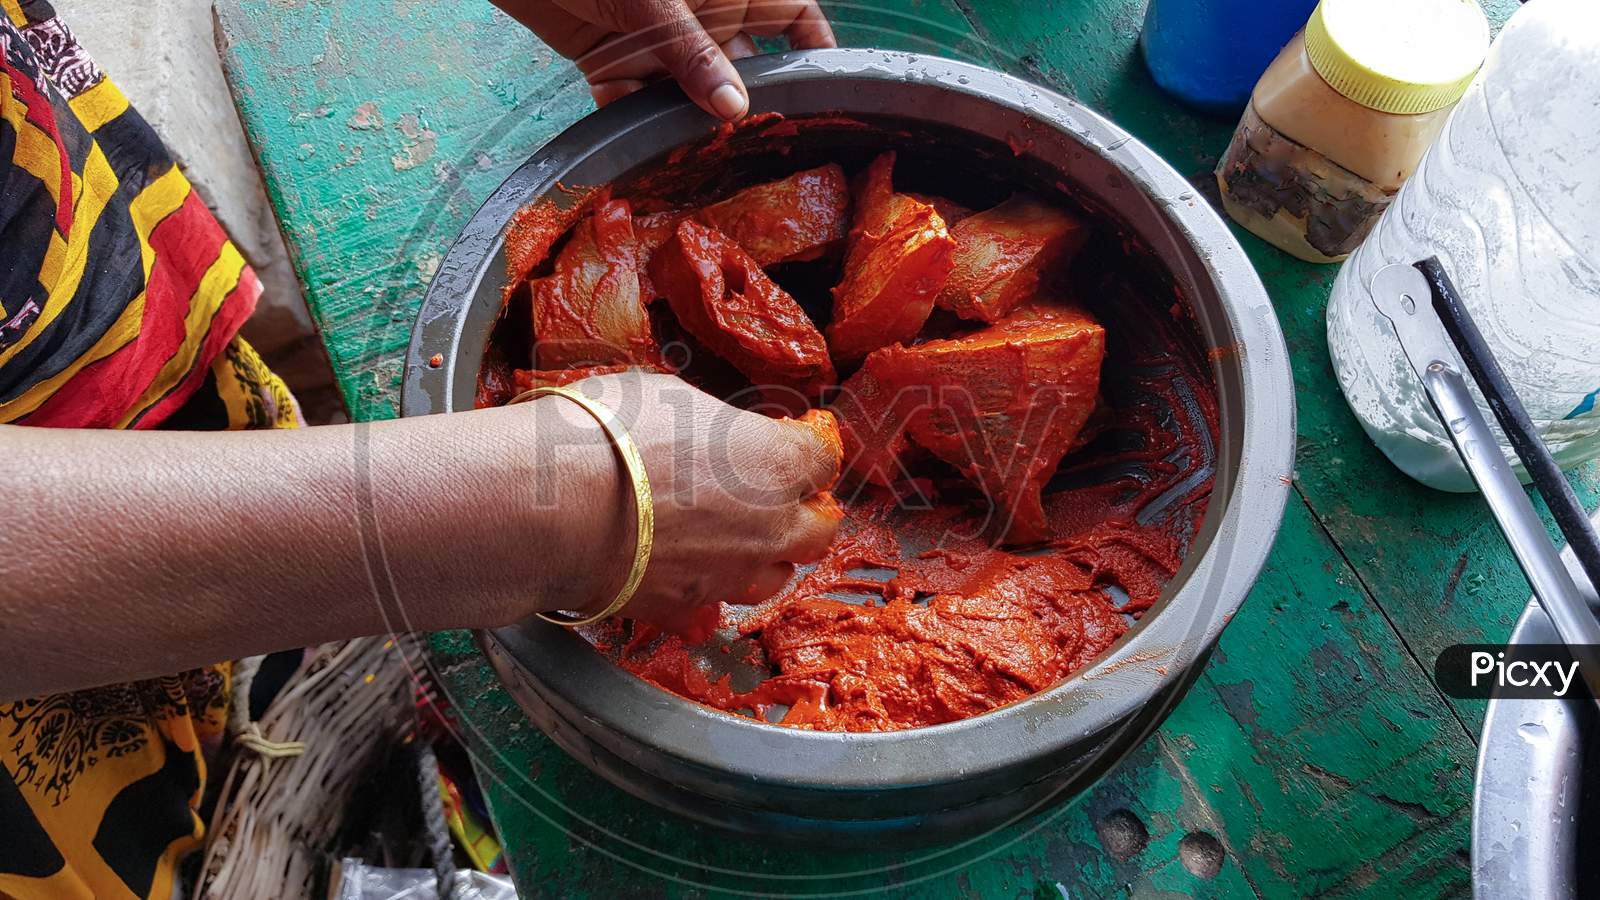 A woman wearing bangles marinating sliced fishes in a spicy curry